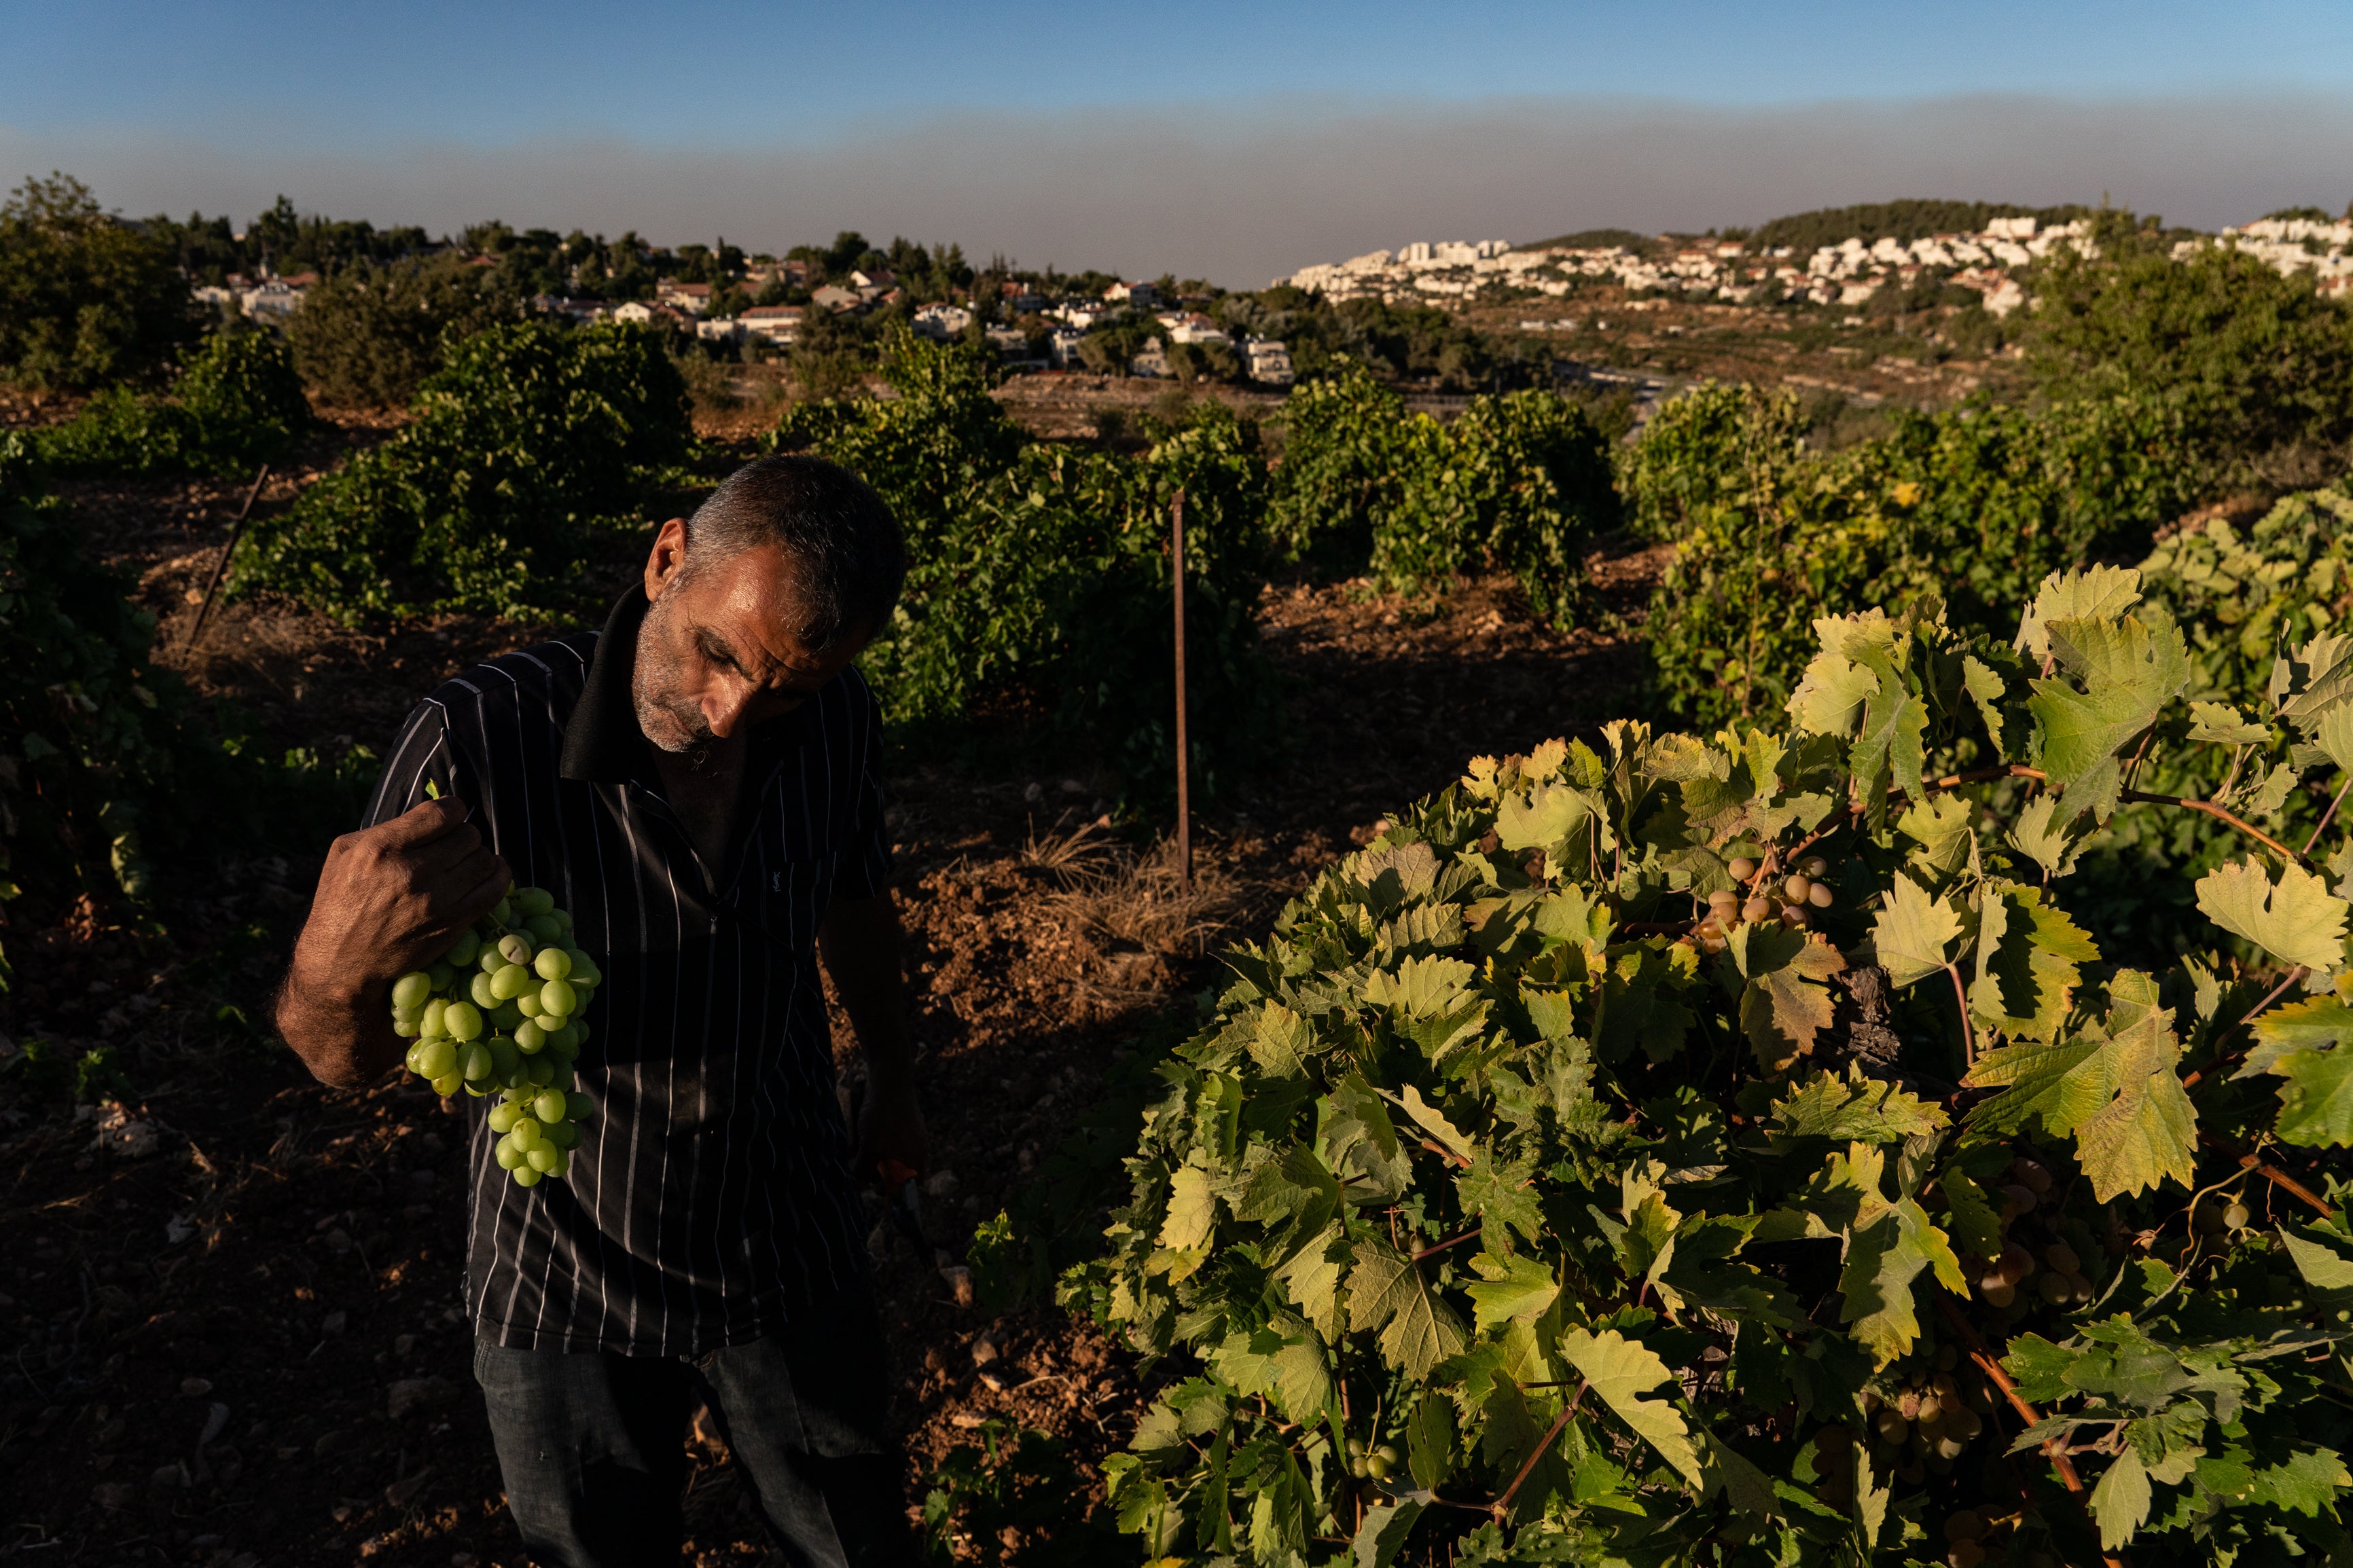 Mahmoud Dadooh harvests grapes on his farm near Bethlehem in the West Bank